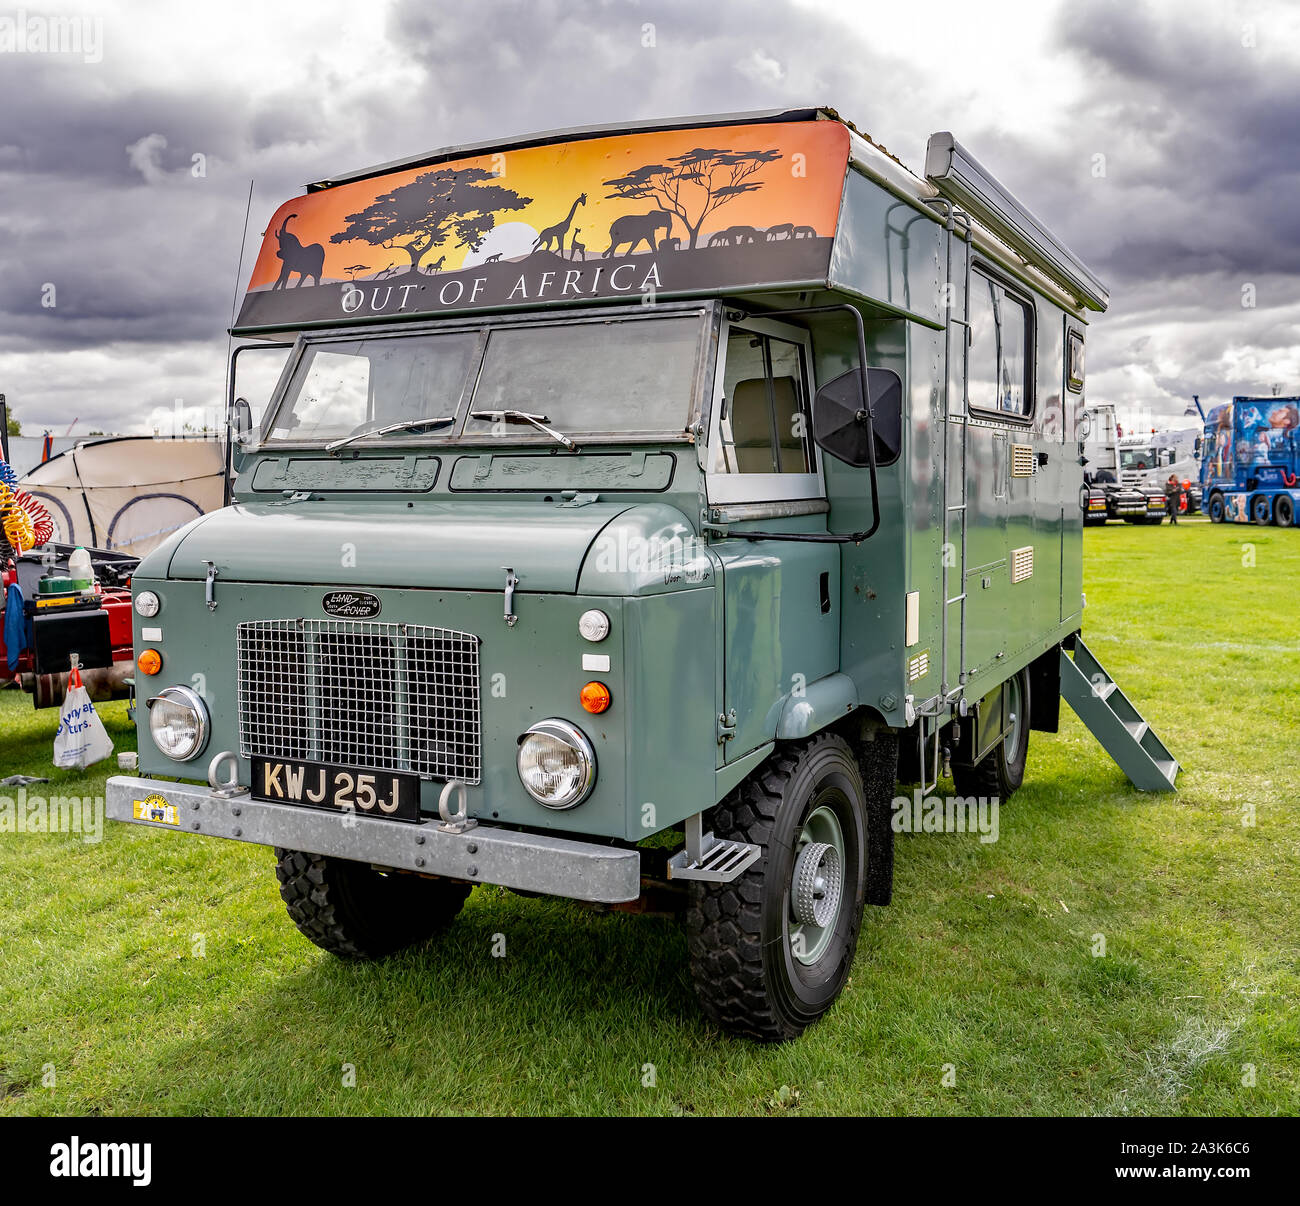 Classic Landrover people carrier used for transporting tourists through the game parks of Africa on safari adventures on display at the annual Newa Stock Photo